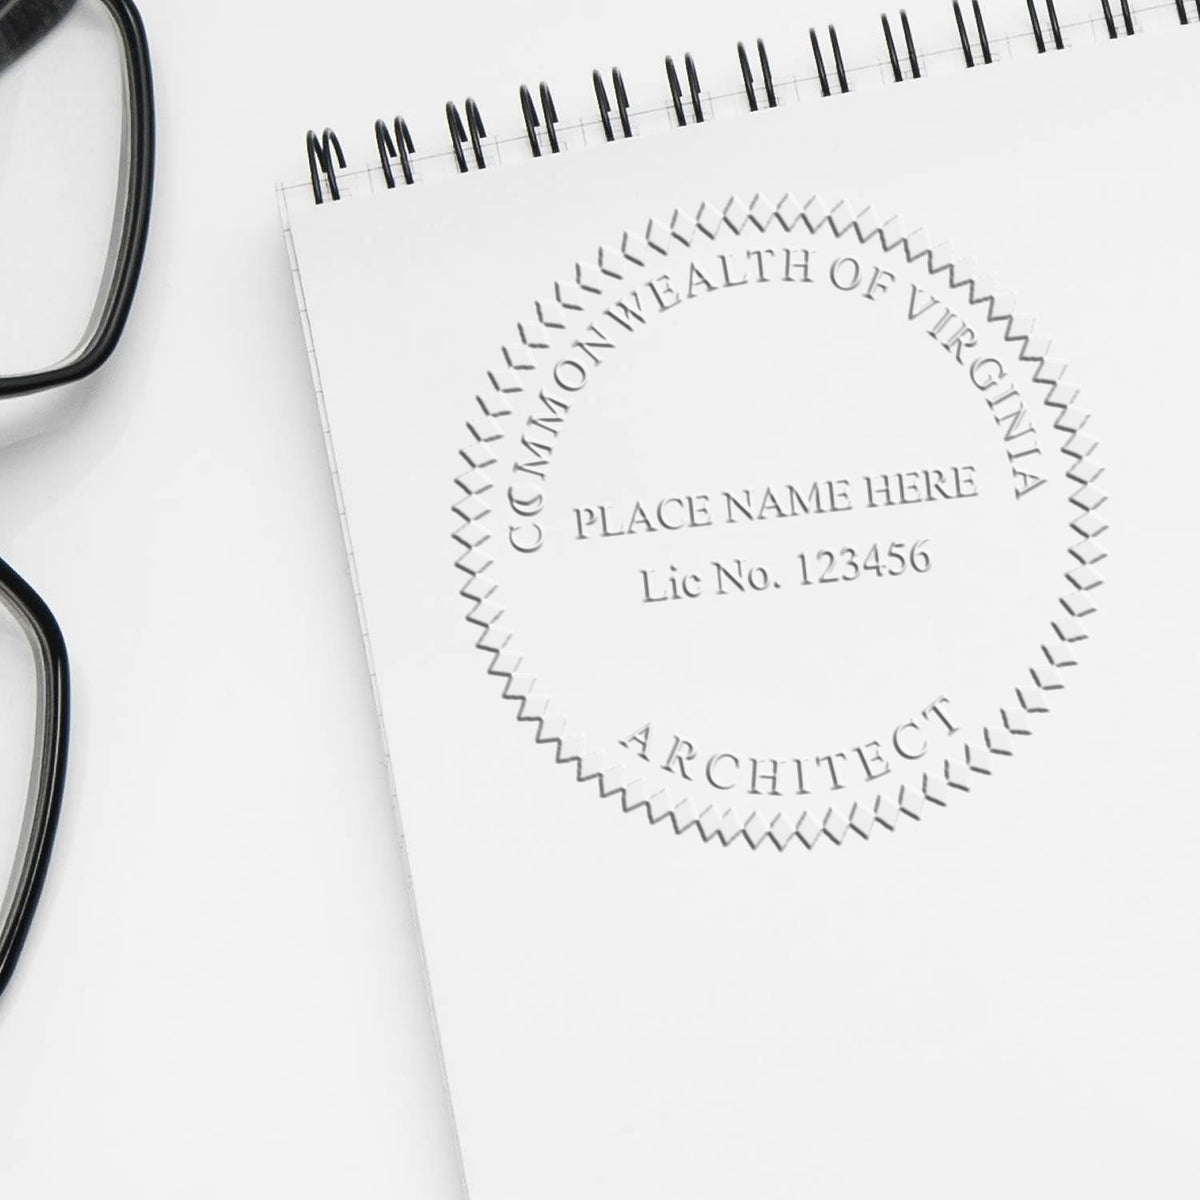 The Gift Virginia Architect Seal stamp impression comes to life with a crisp, detailed image stamped on paper - showcasing true professional quality.